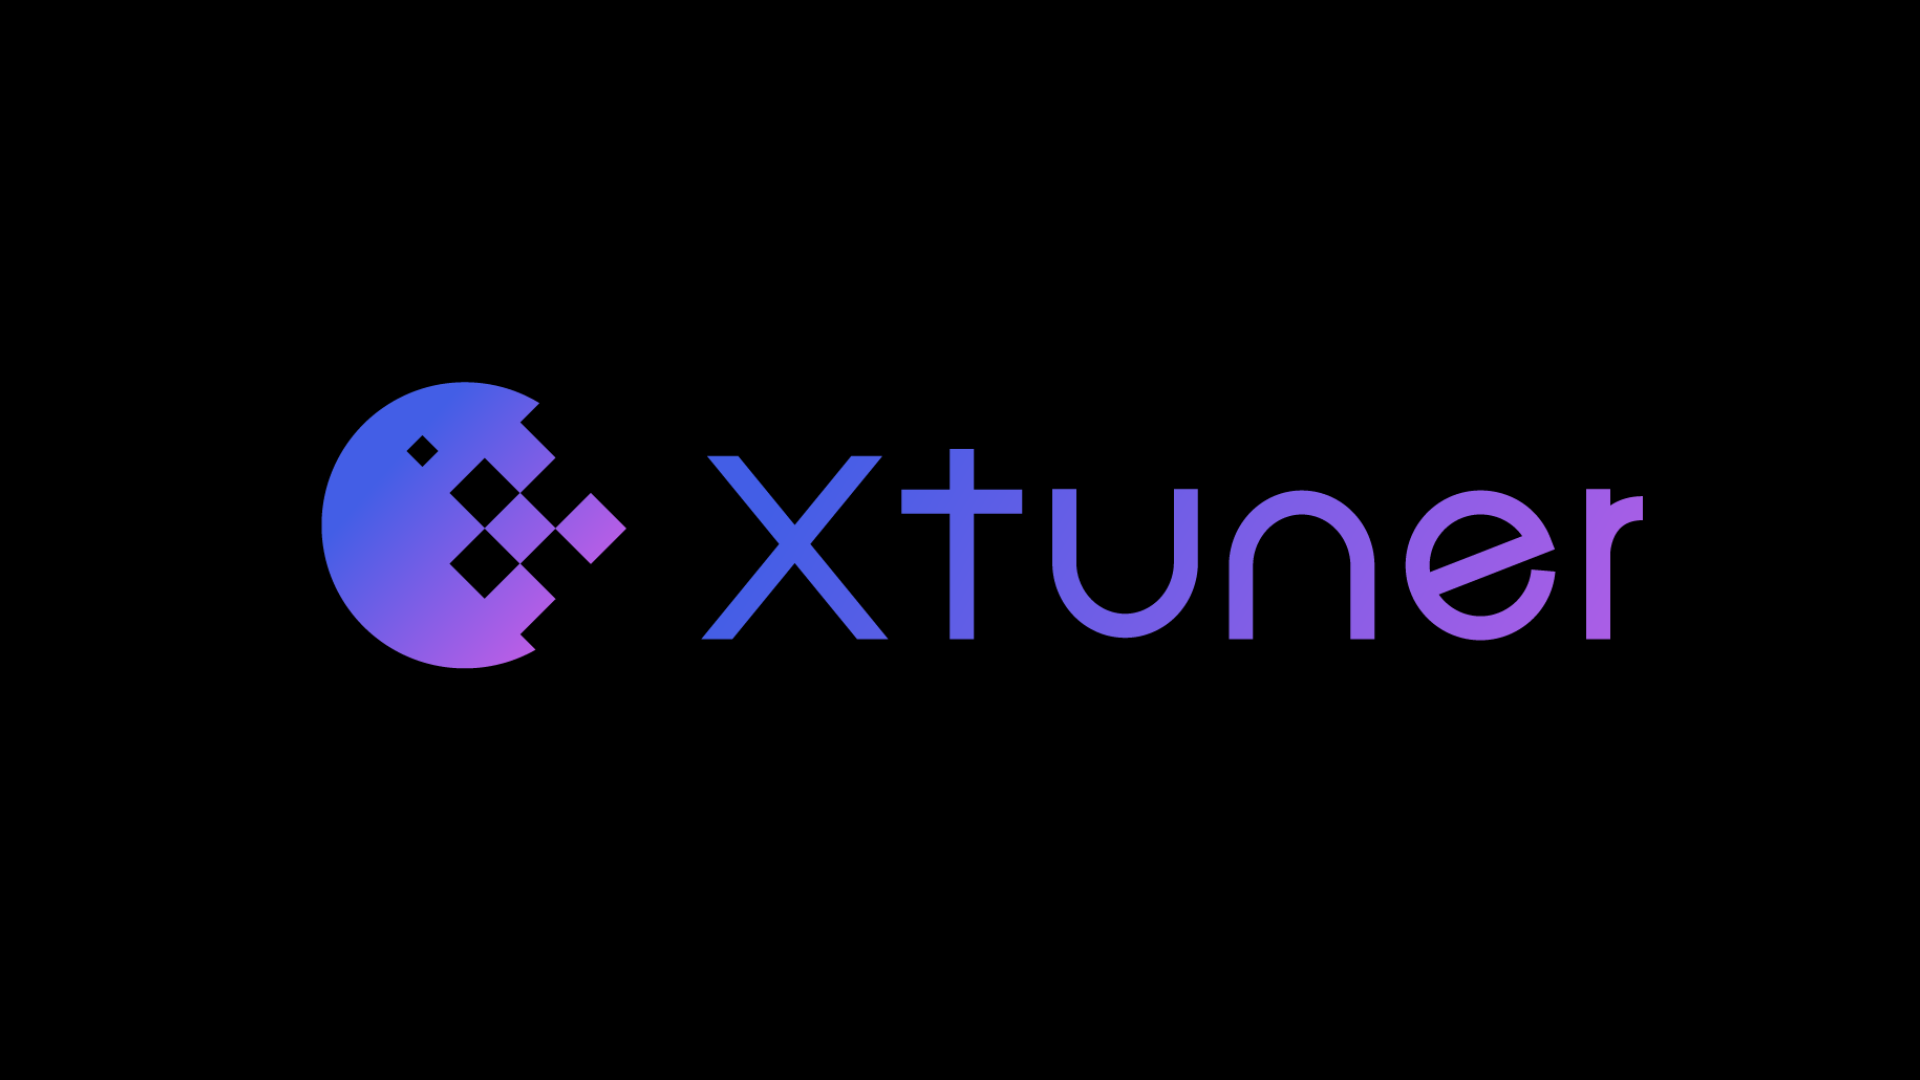  XTuner: An Efficient, Flexible, and Full-Featured AI Toolkit for Fine-Tuning Large Models